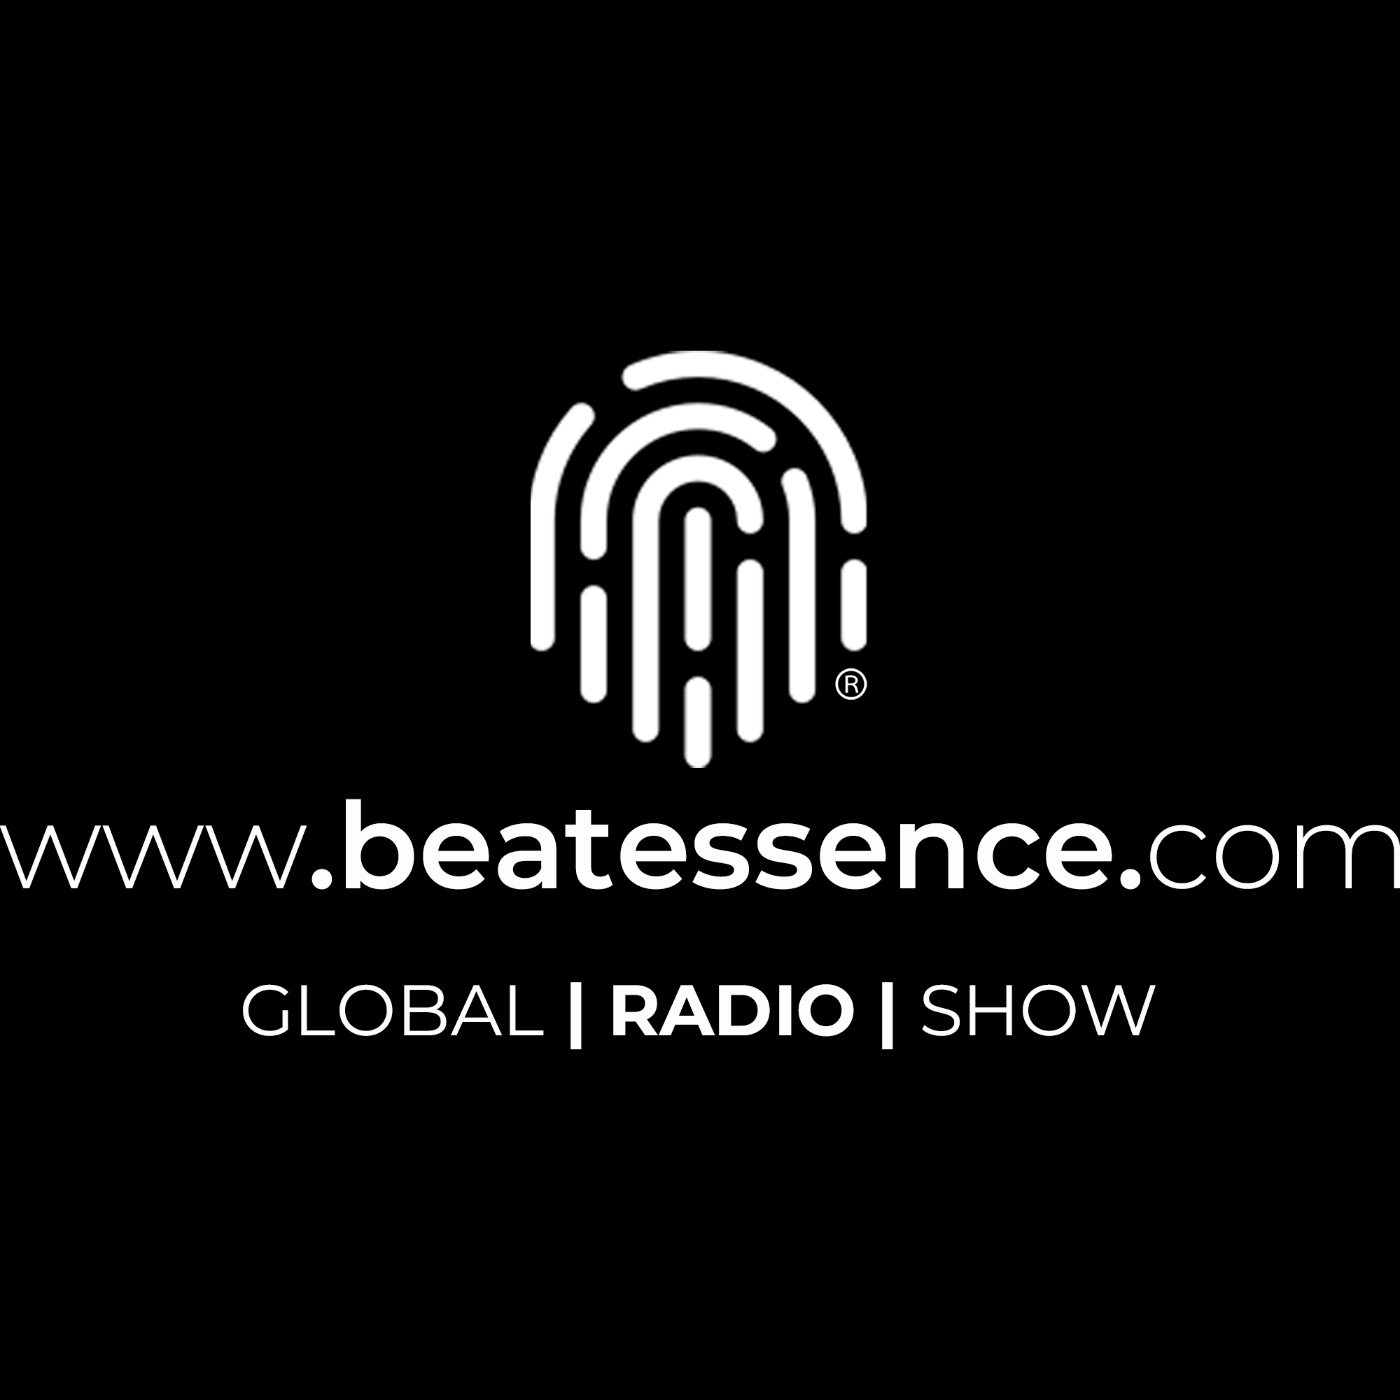 Beat Essence from Ibiza episodio #029 mixed by Dj Saave.